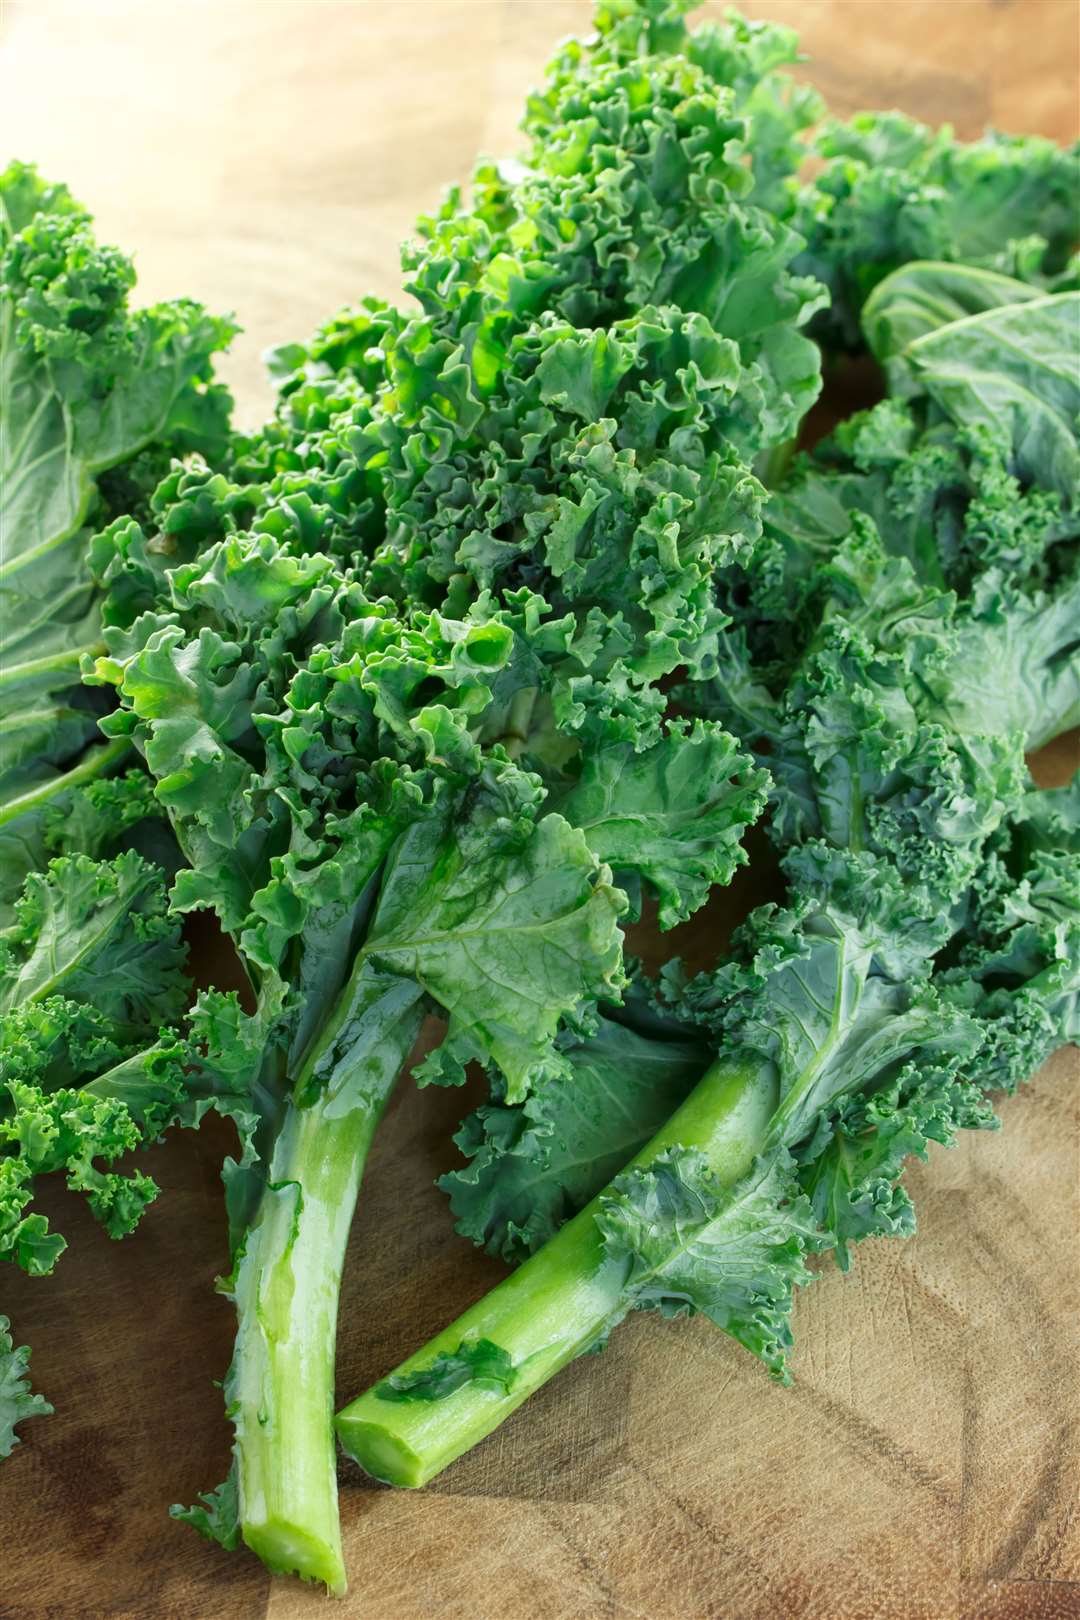 The researchers found that both young and mature kale is effective in limiting weight gain in mice fed a high-fat diet (Alamy/PA)